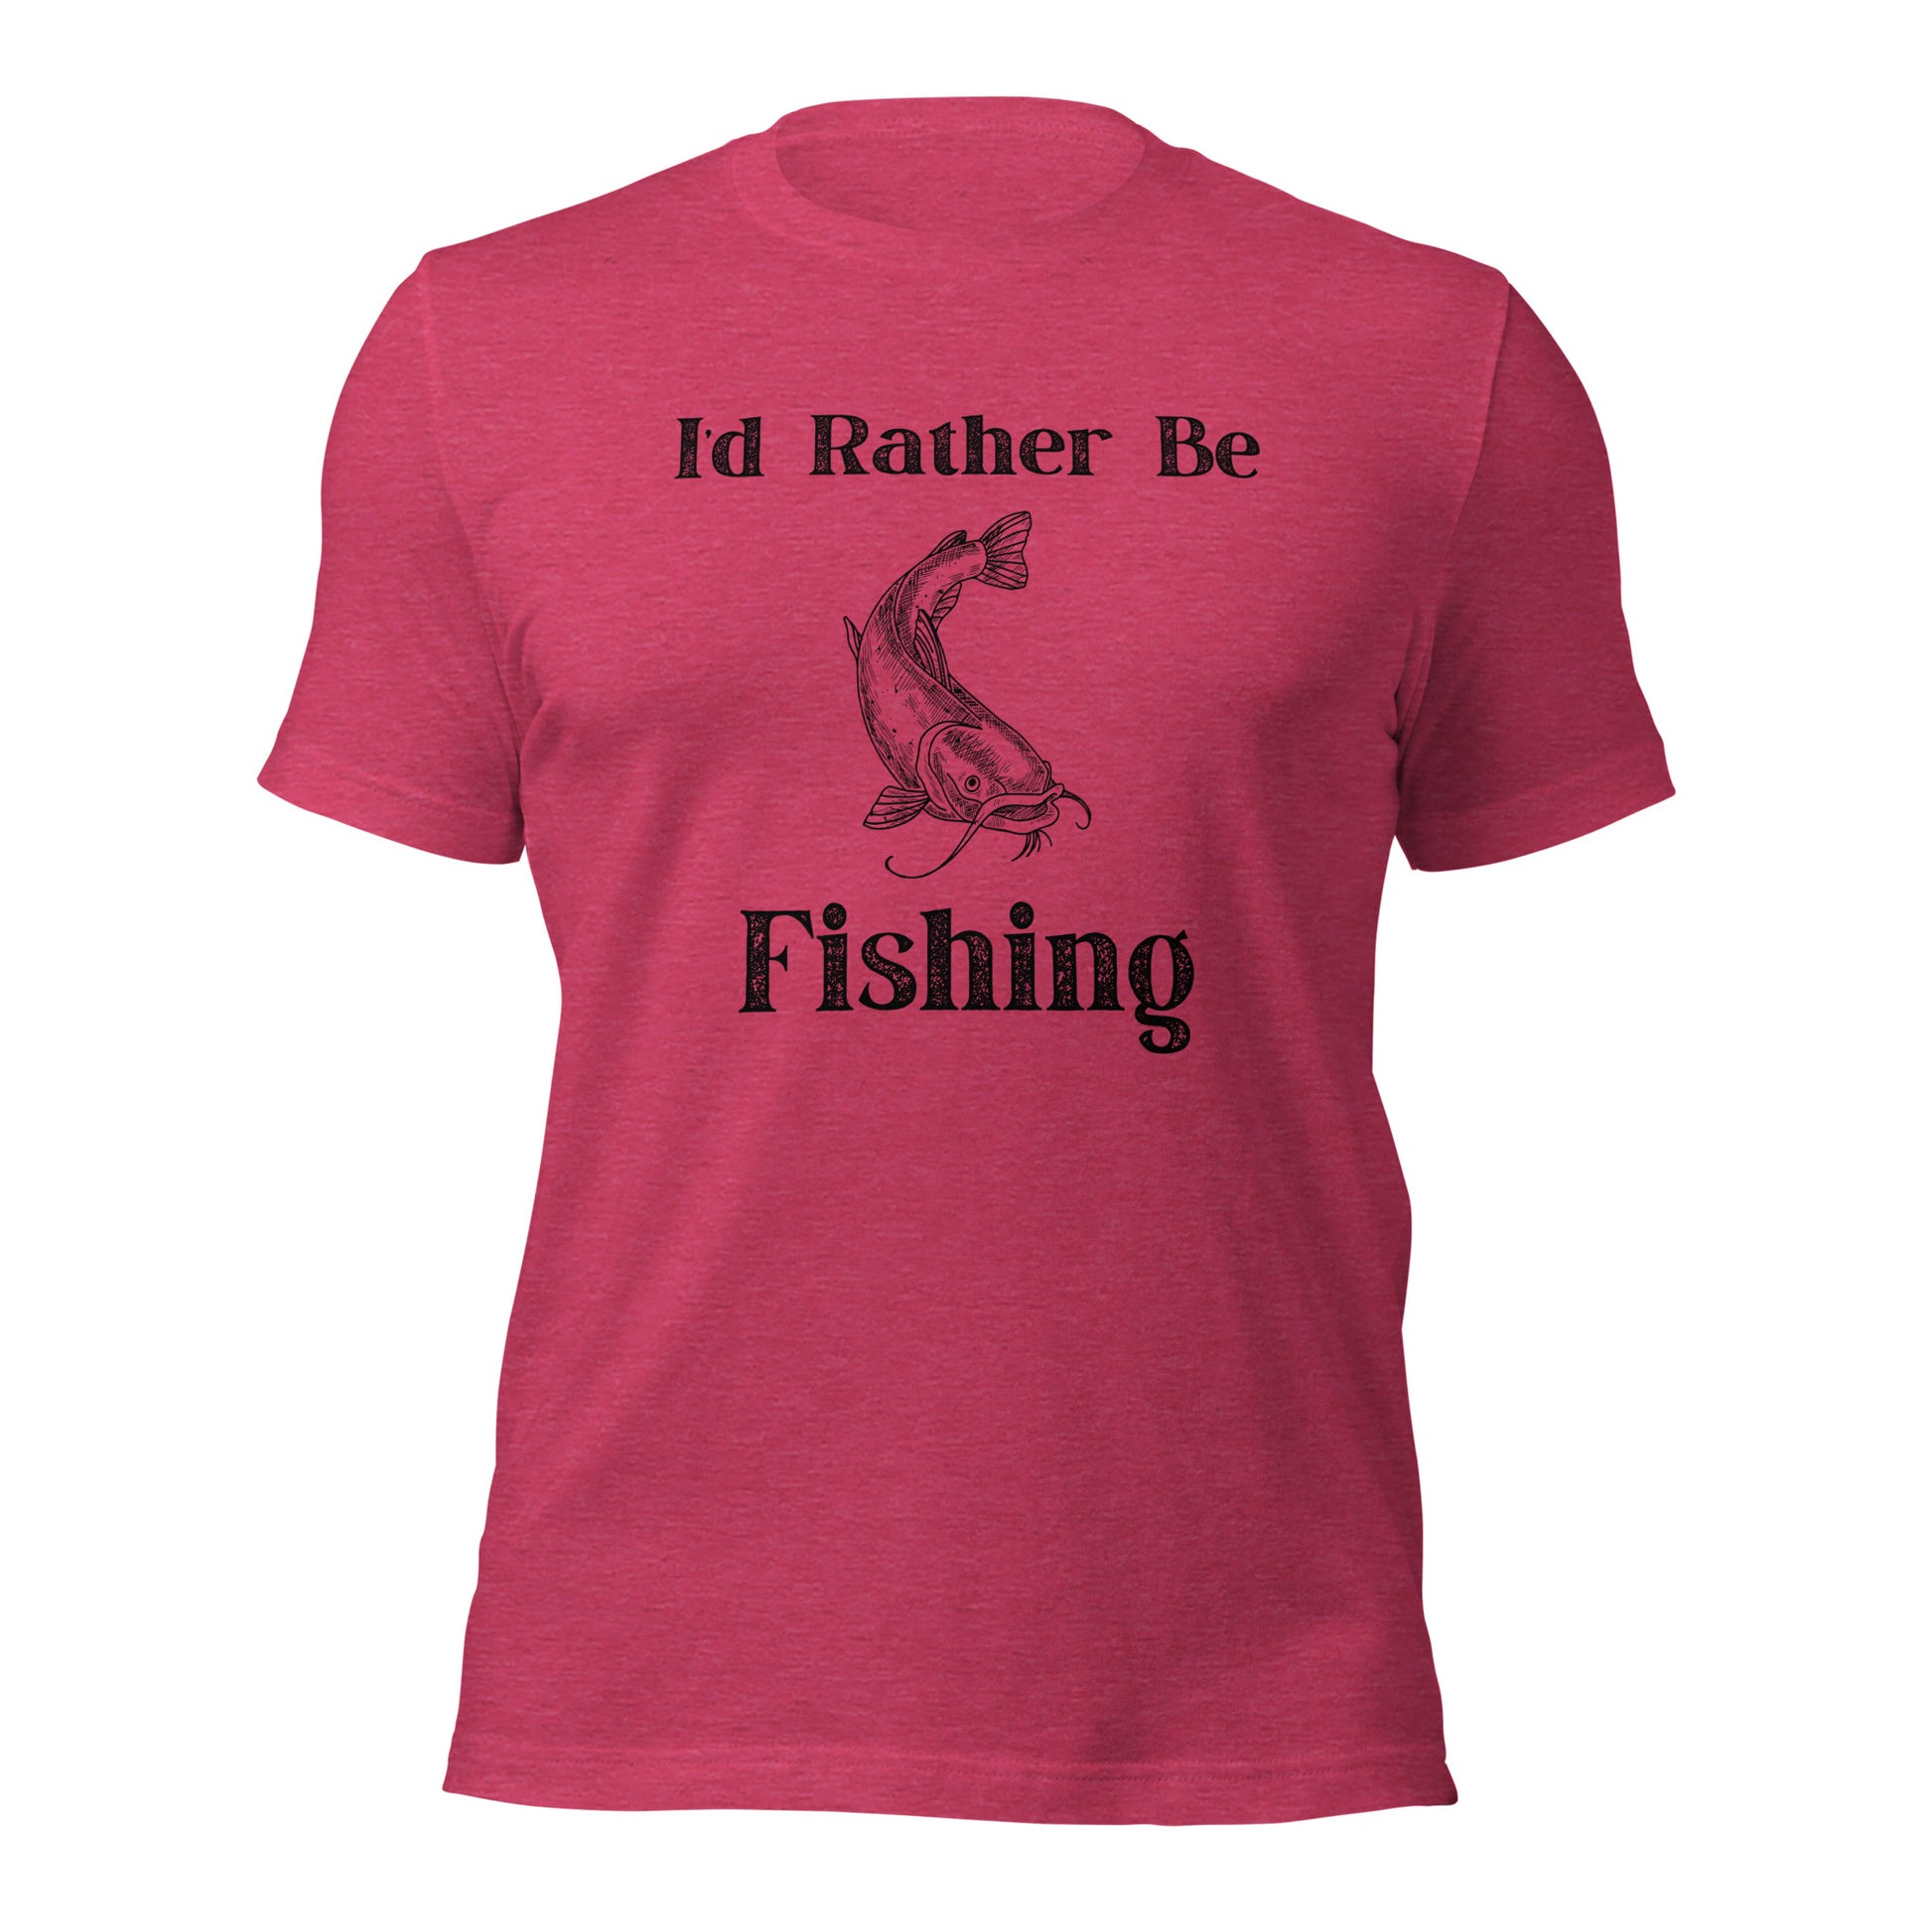 "I'd Rather Be Fishing" cotton t-shirt for outdoor enthusiasts.